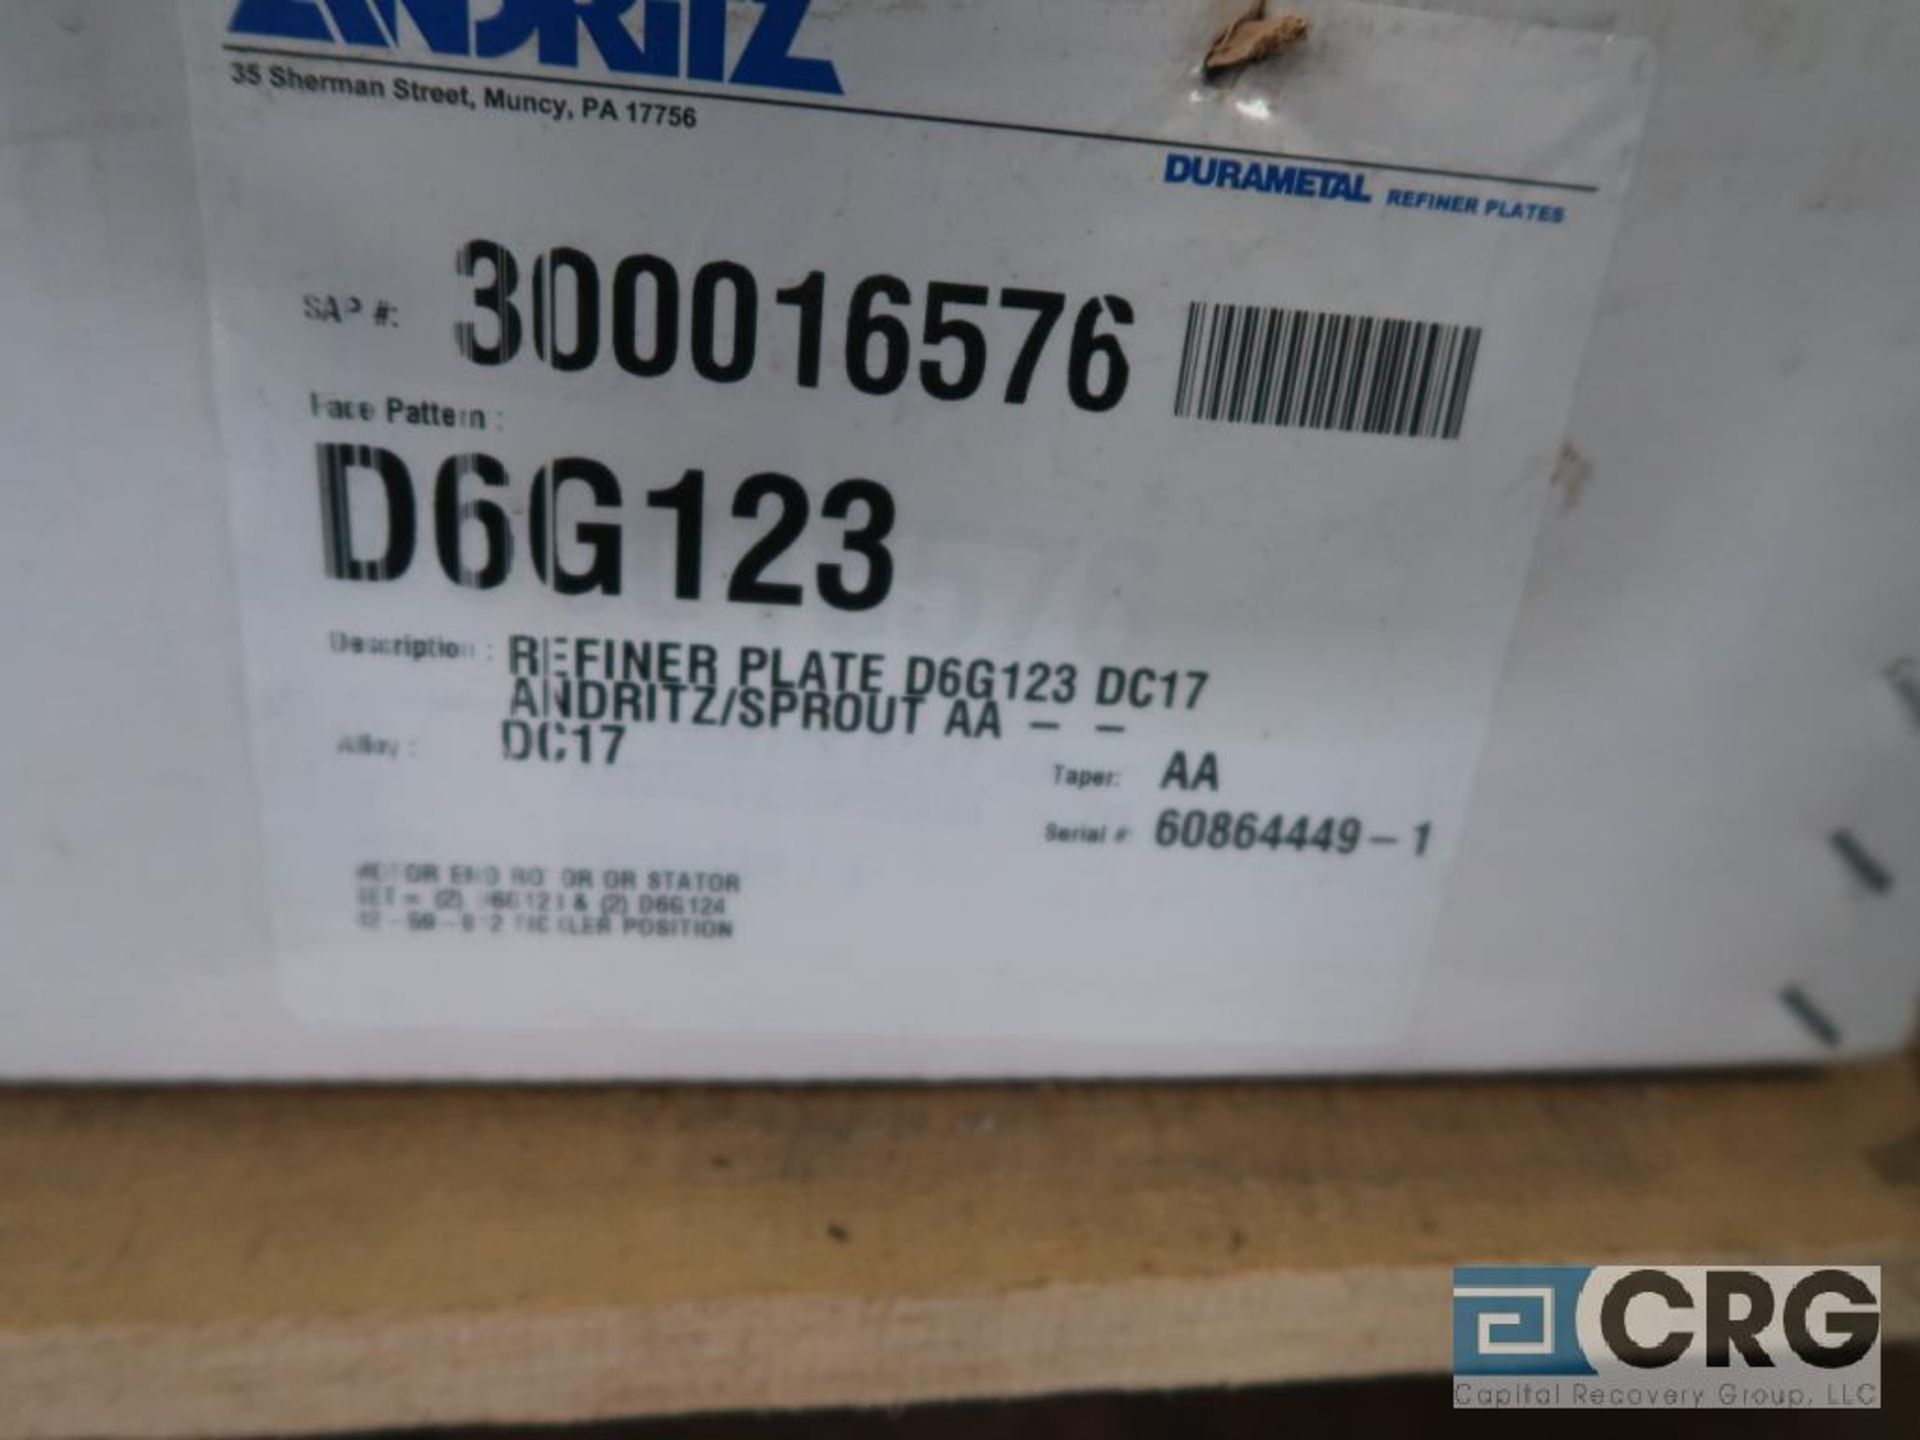 Lot of (4) Andritz D6G123 refiner plates (Finish Building) - Image 2 of 2